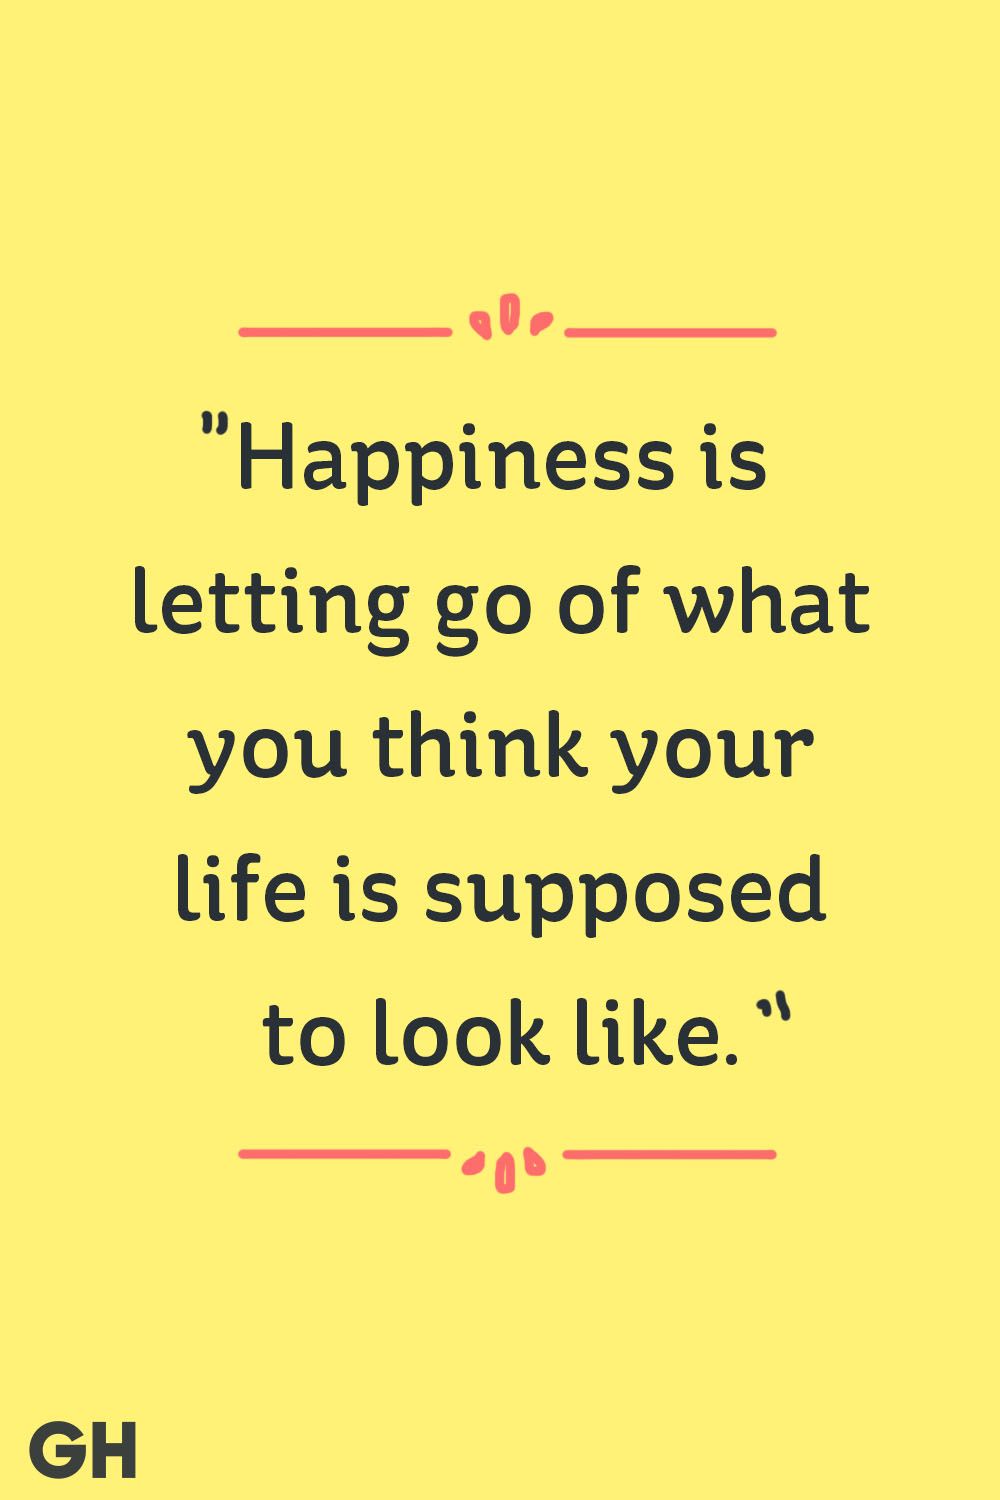 "Happiness is letting go of what you think your life is supposed to look like."